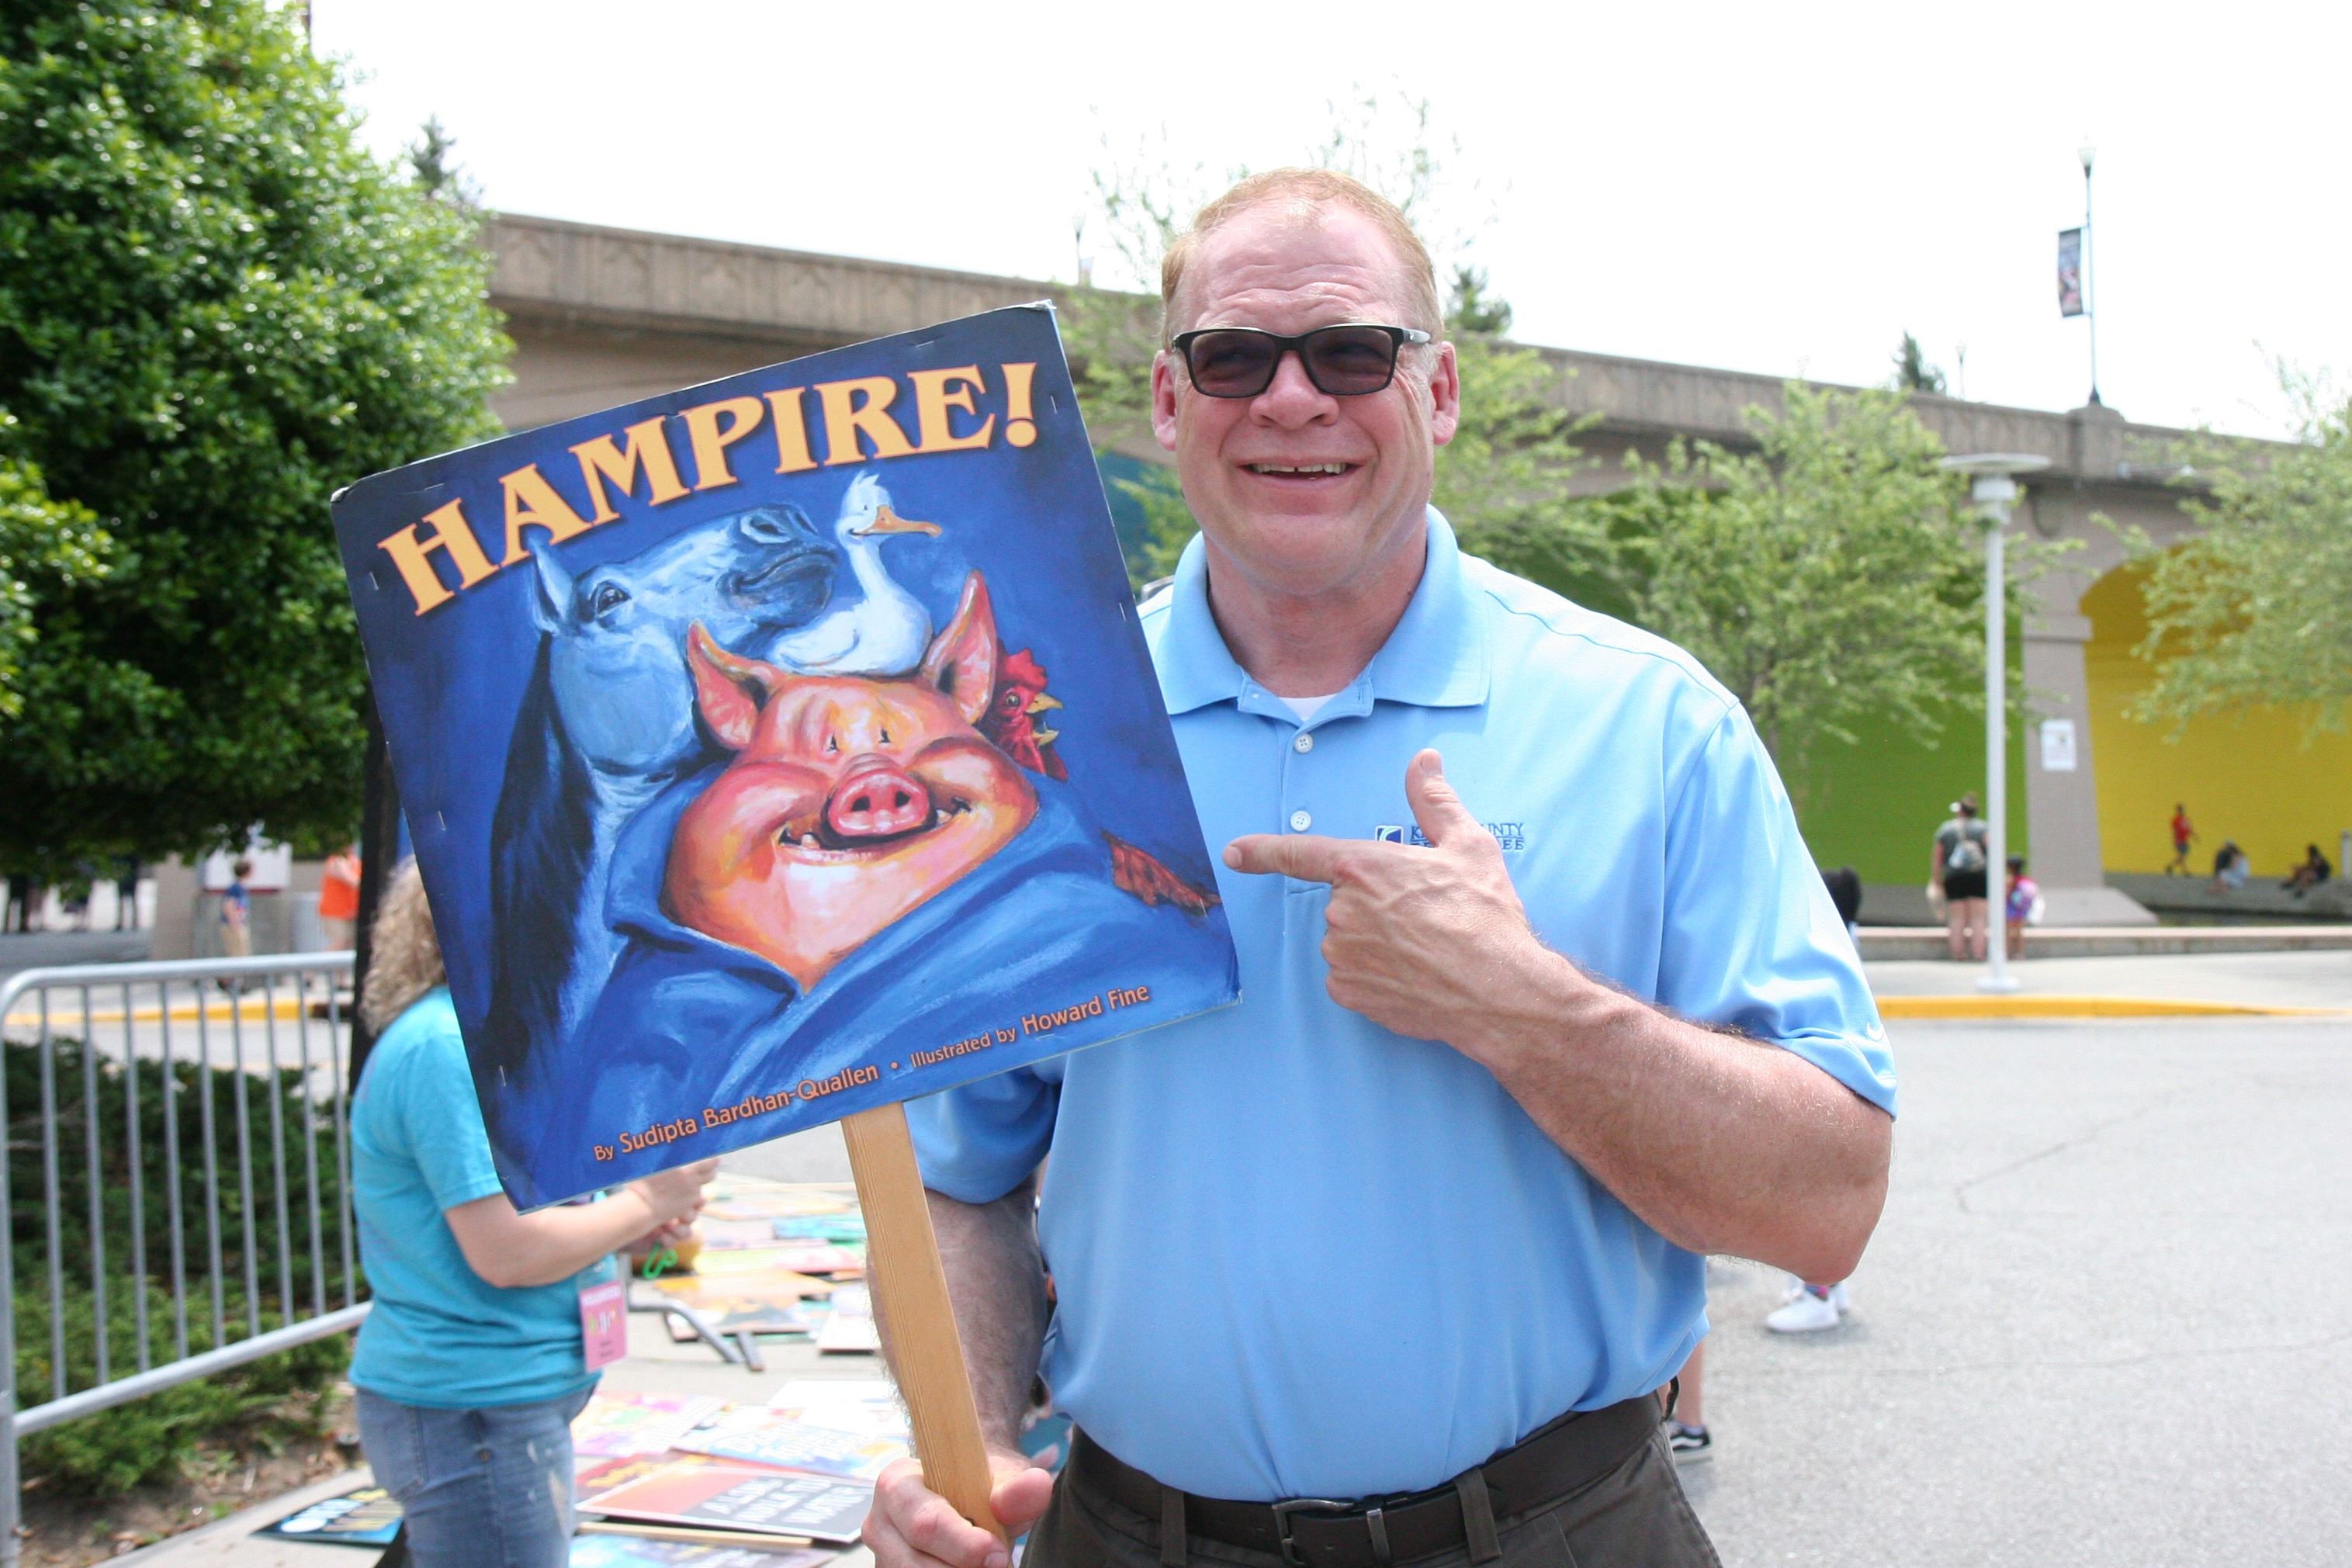 Mayor Jacobs holds an enlarged book cover of Hampire